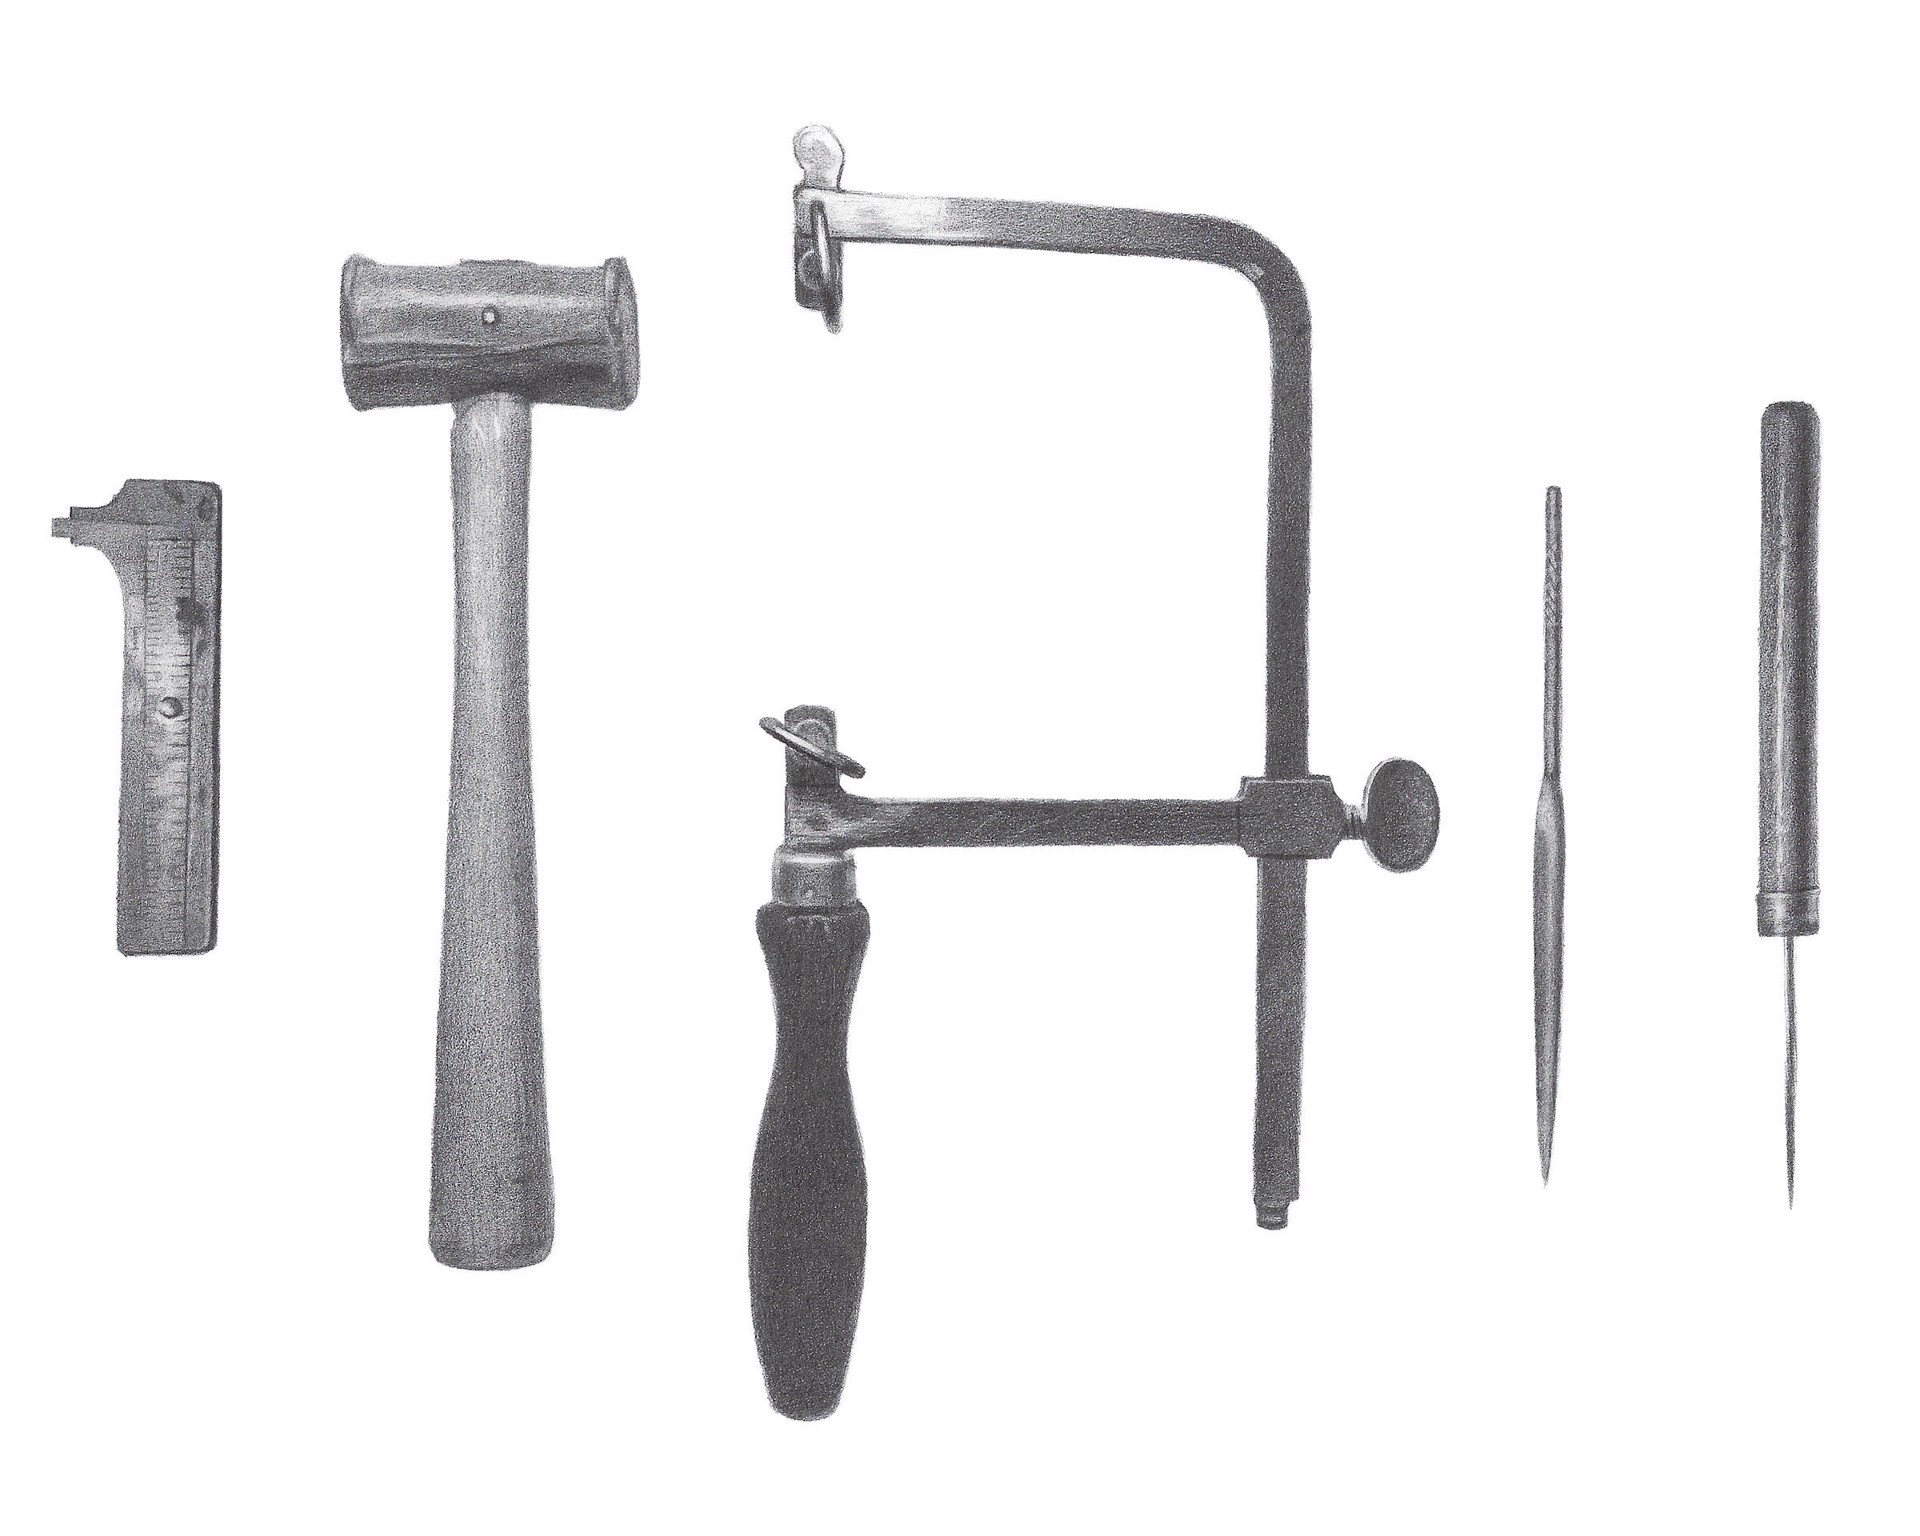 A Jeweler's Tools by Missy Dunaway